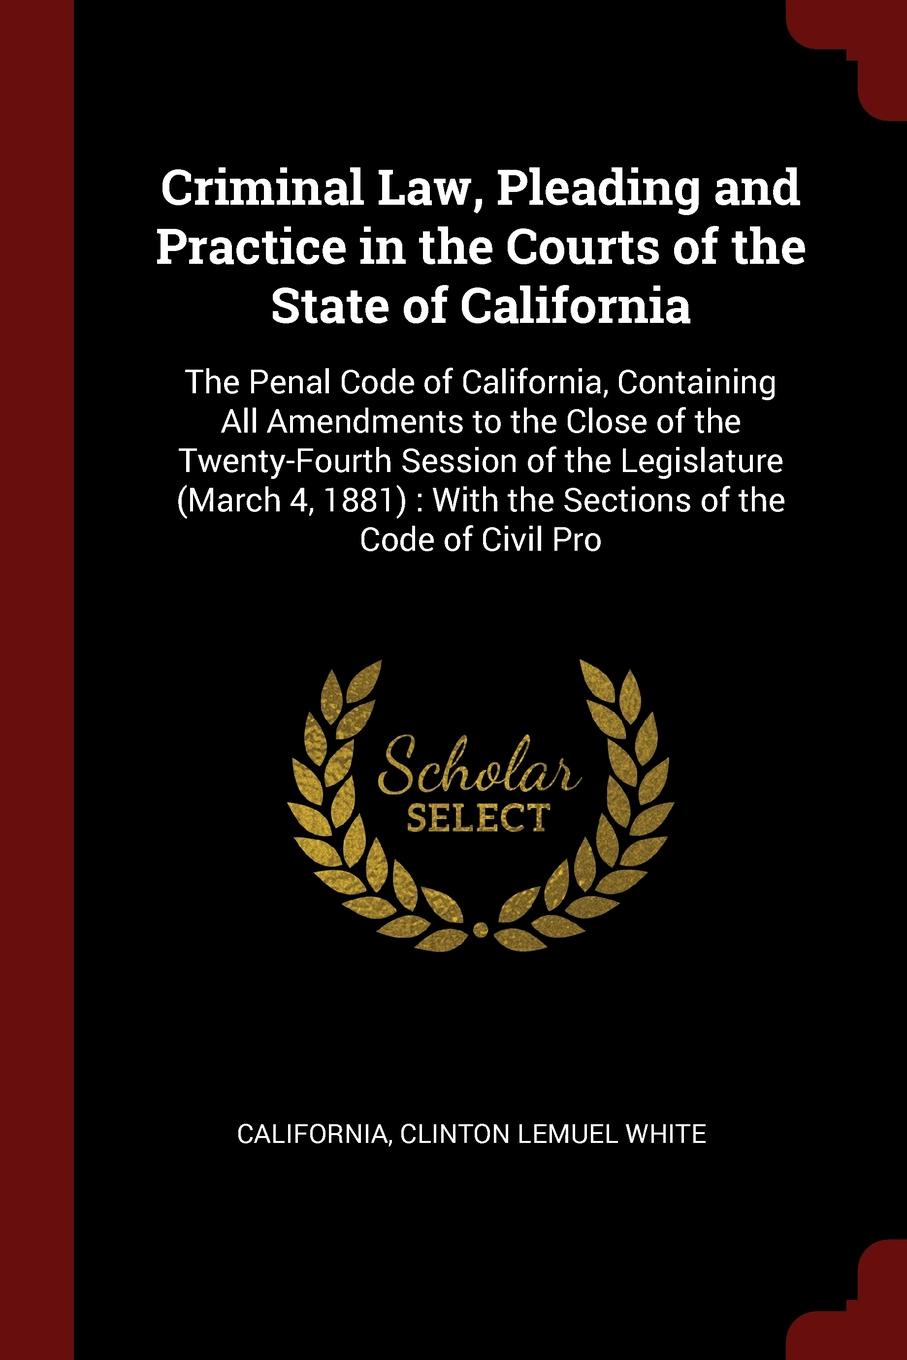 Criminal Law, Pleading and Practice in the Courts of the State of California. The Penal Code of California, Containing All Amendments to the Close of the Twenty-Fourth Session of the Legislature (March 4, 1881) : With the Sections of the Code of C...